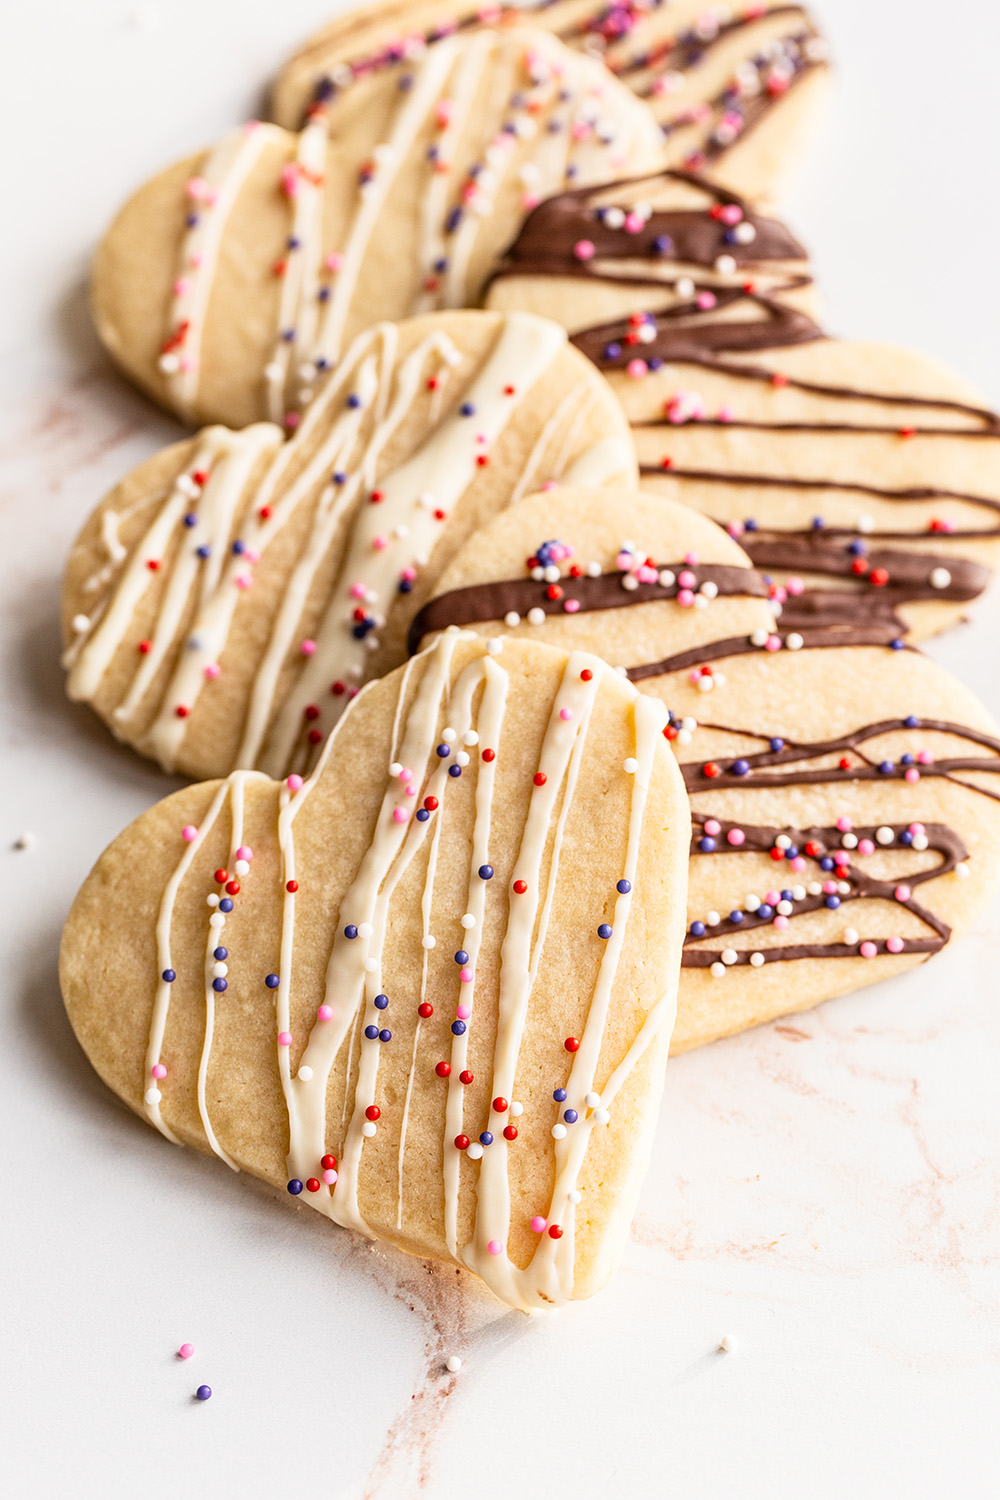 a few sugar cookies neatly stacked, all drizzled with chocolate and sprinkles on top.